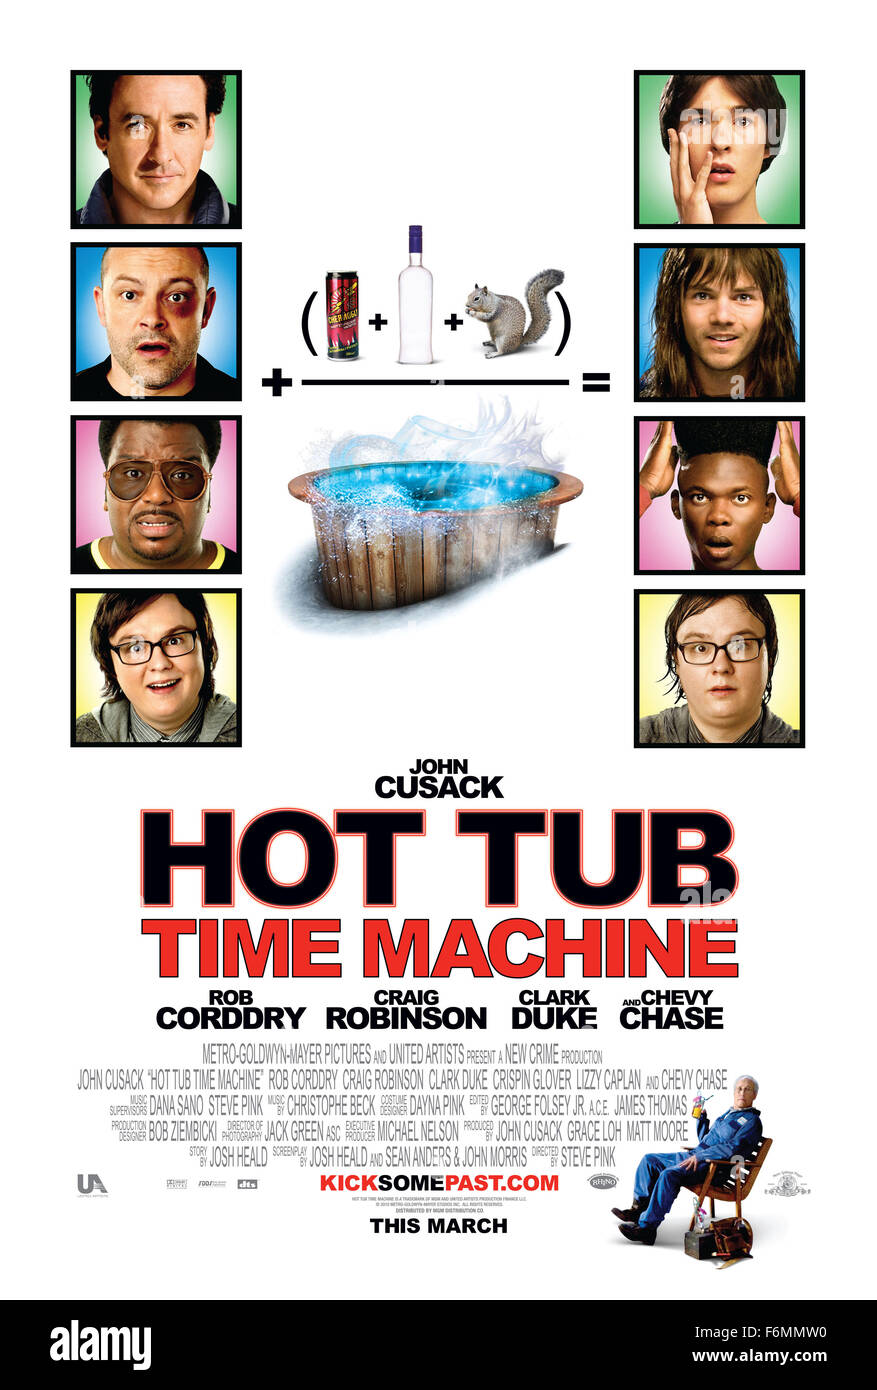 RELEASE DATE: March 26, 2010. MOVIE TITLE: Hot Tub Time Machine. STUDIO: Metro-Goldwyn-Mayer. PLOT: Four guy friends, all of them bored with their adult lives, travel back to their respective 80s heydays thanks to a time-bending hot tub. PICTURED: JOHN CUSACK, CLARK DUKE, CRAIG ROBINSON, ROB CORDDRY. Stock Photo